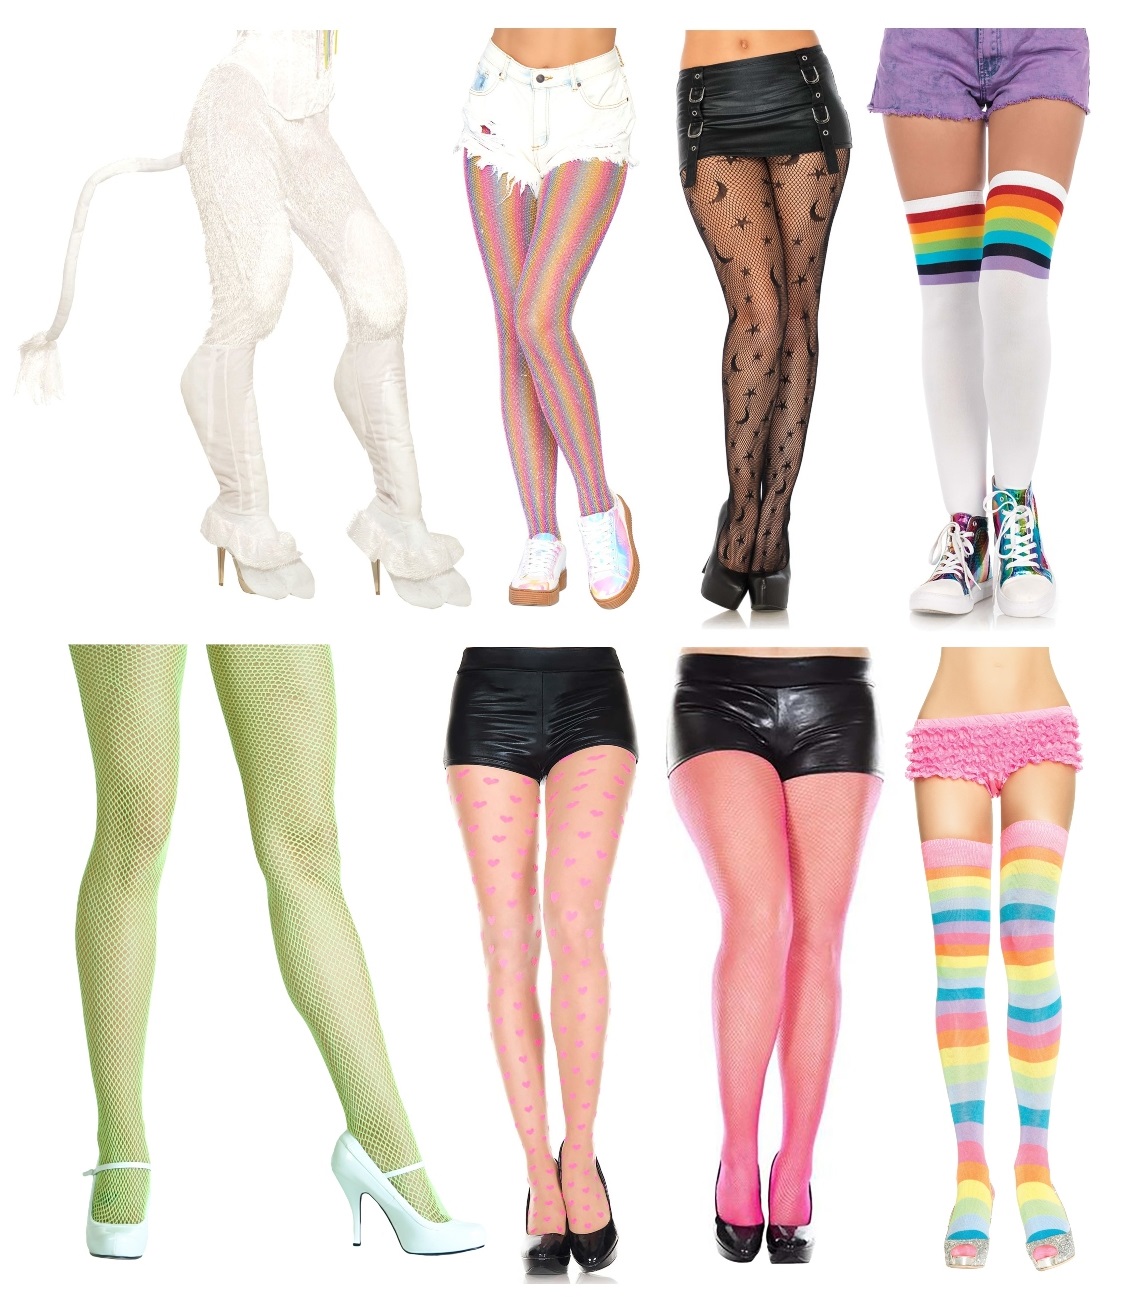 Colorful Leggings and Hosiery for Pride